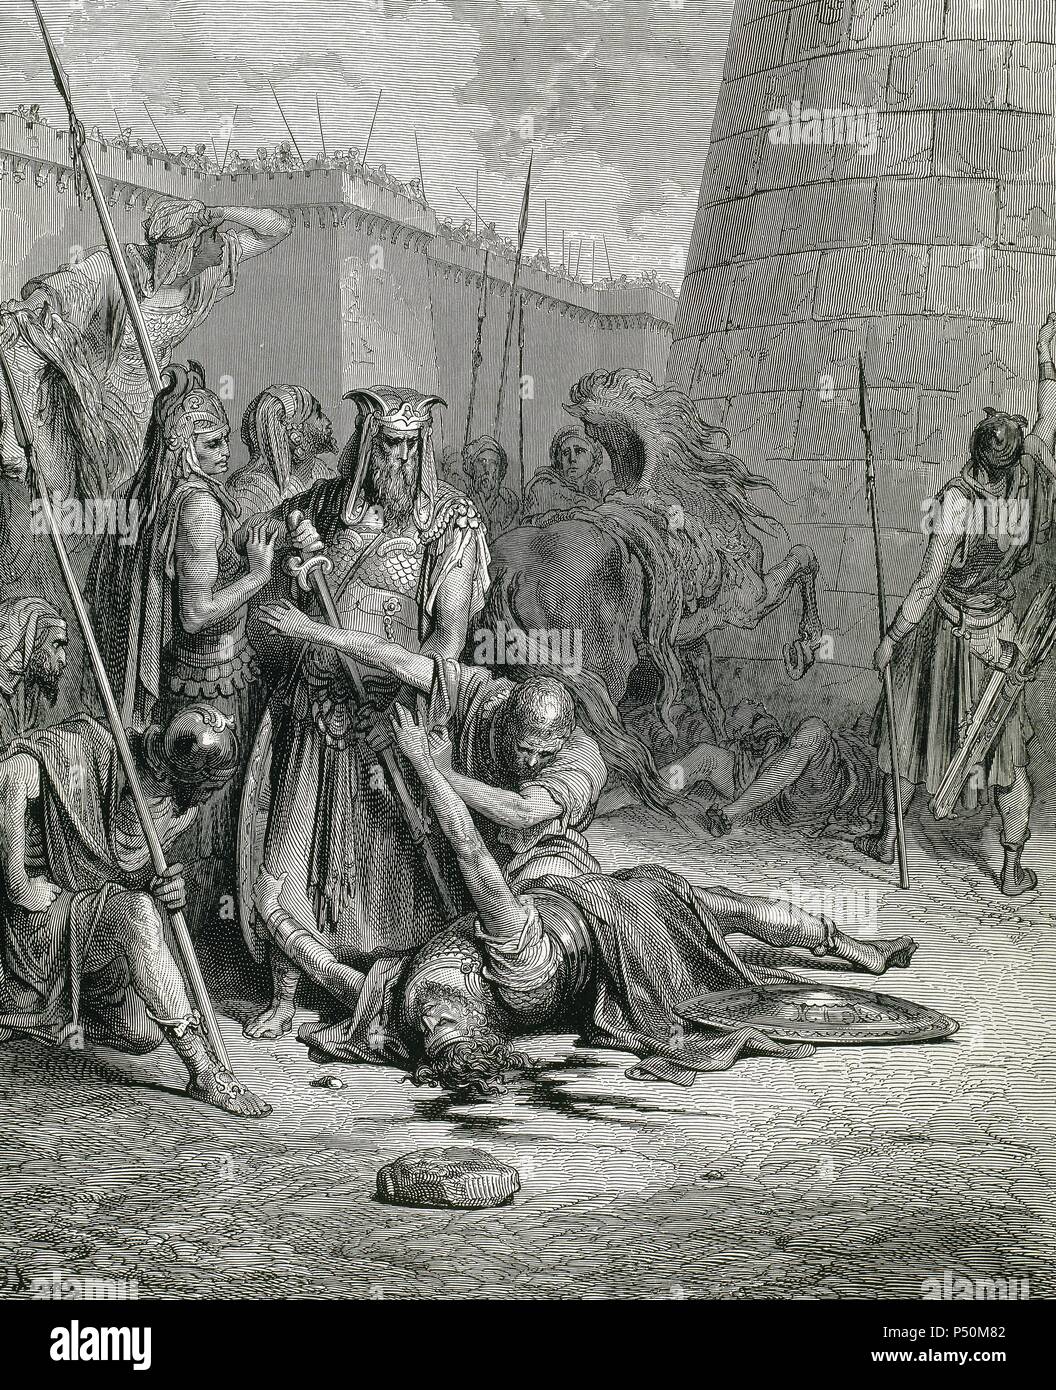 Abimelech (nineteenth century BC). Philistine king of Gerar (southern Palestine). Death of Abimelech. Engraving by E. Goebel on an illustration by Gustave Dore´ (1833-1883) for 'The Bible in Pictures.'. Stock Photo